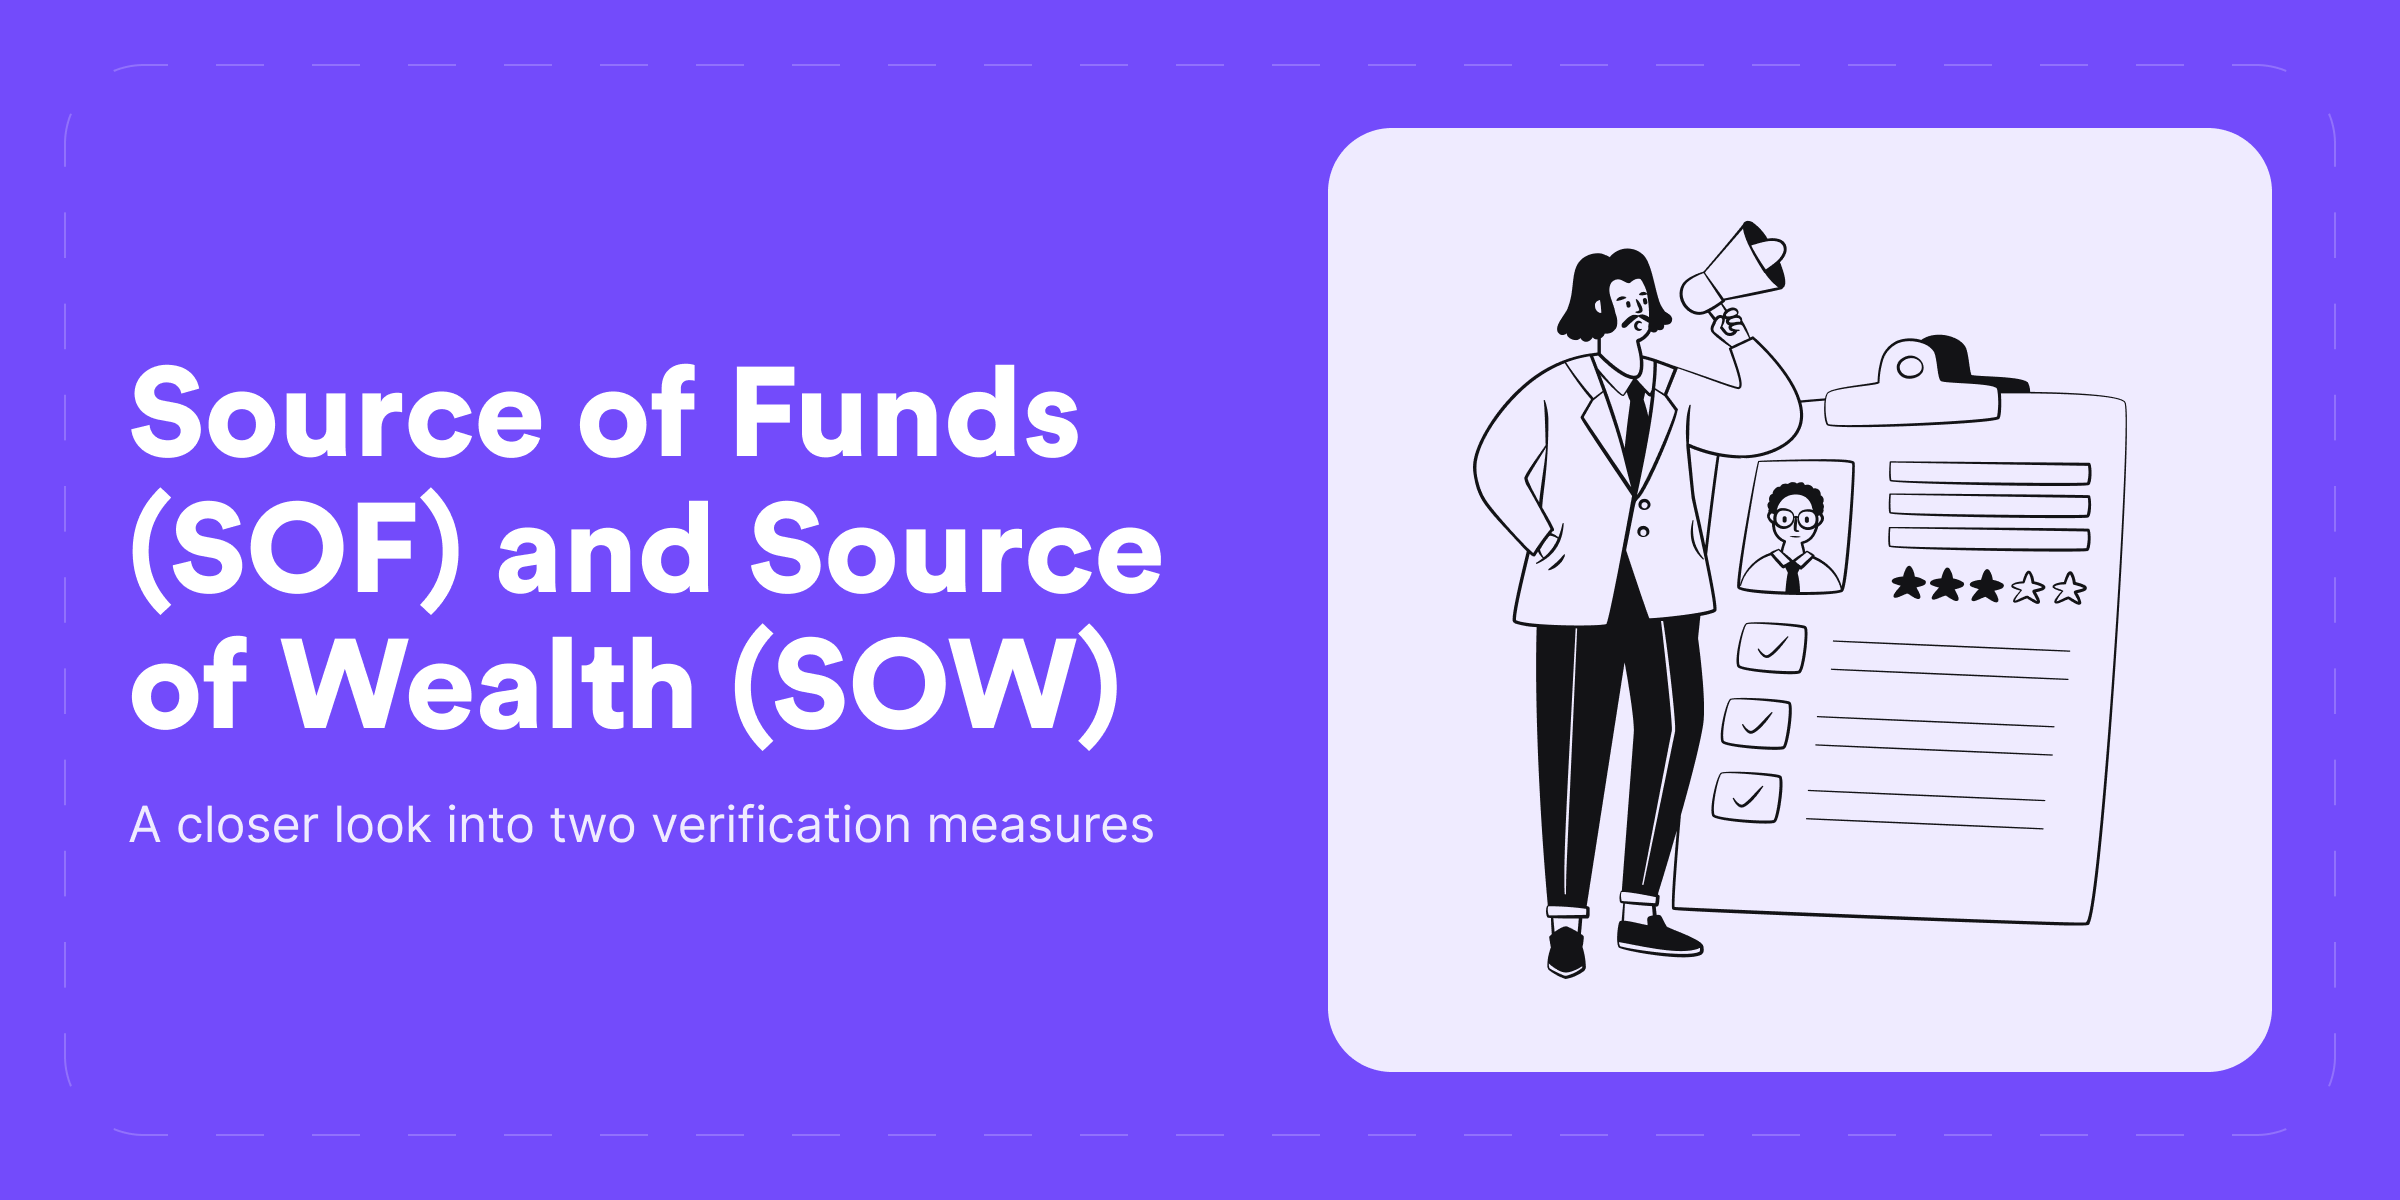 Source of funds (SOF) and source of wealth (SOW)